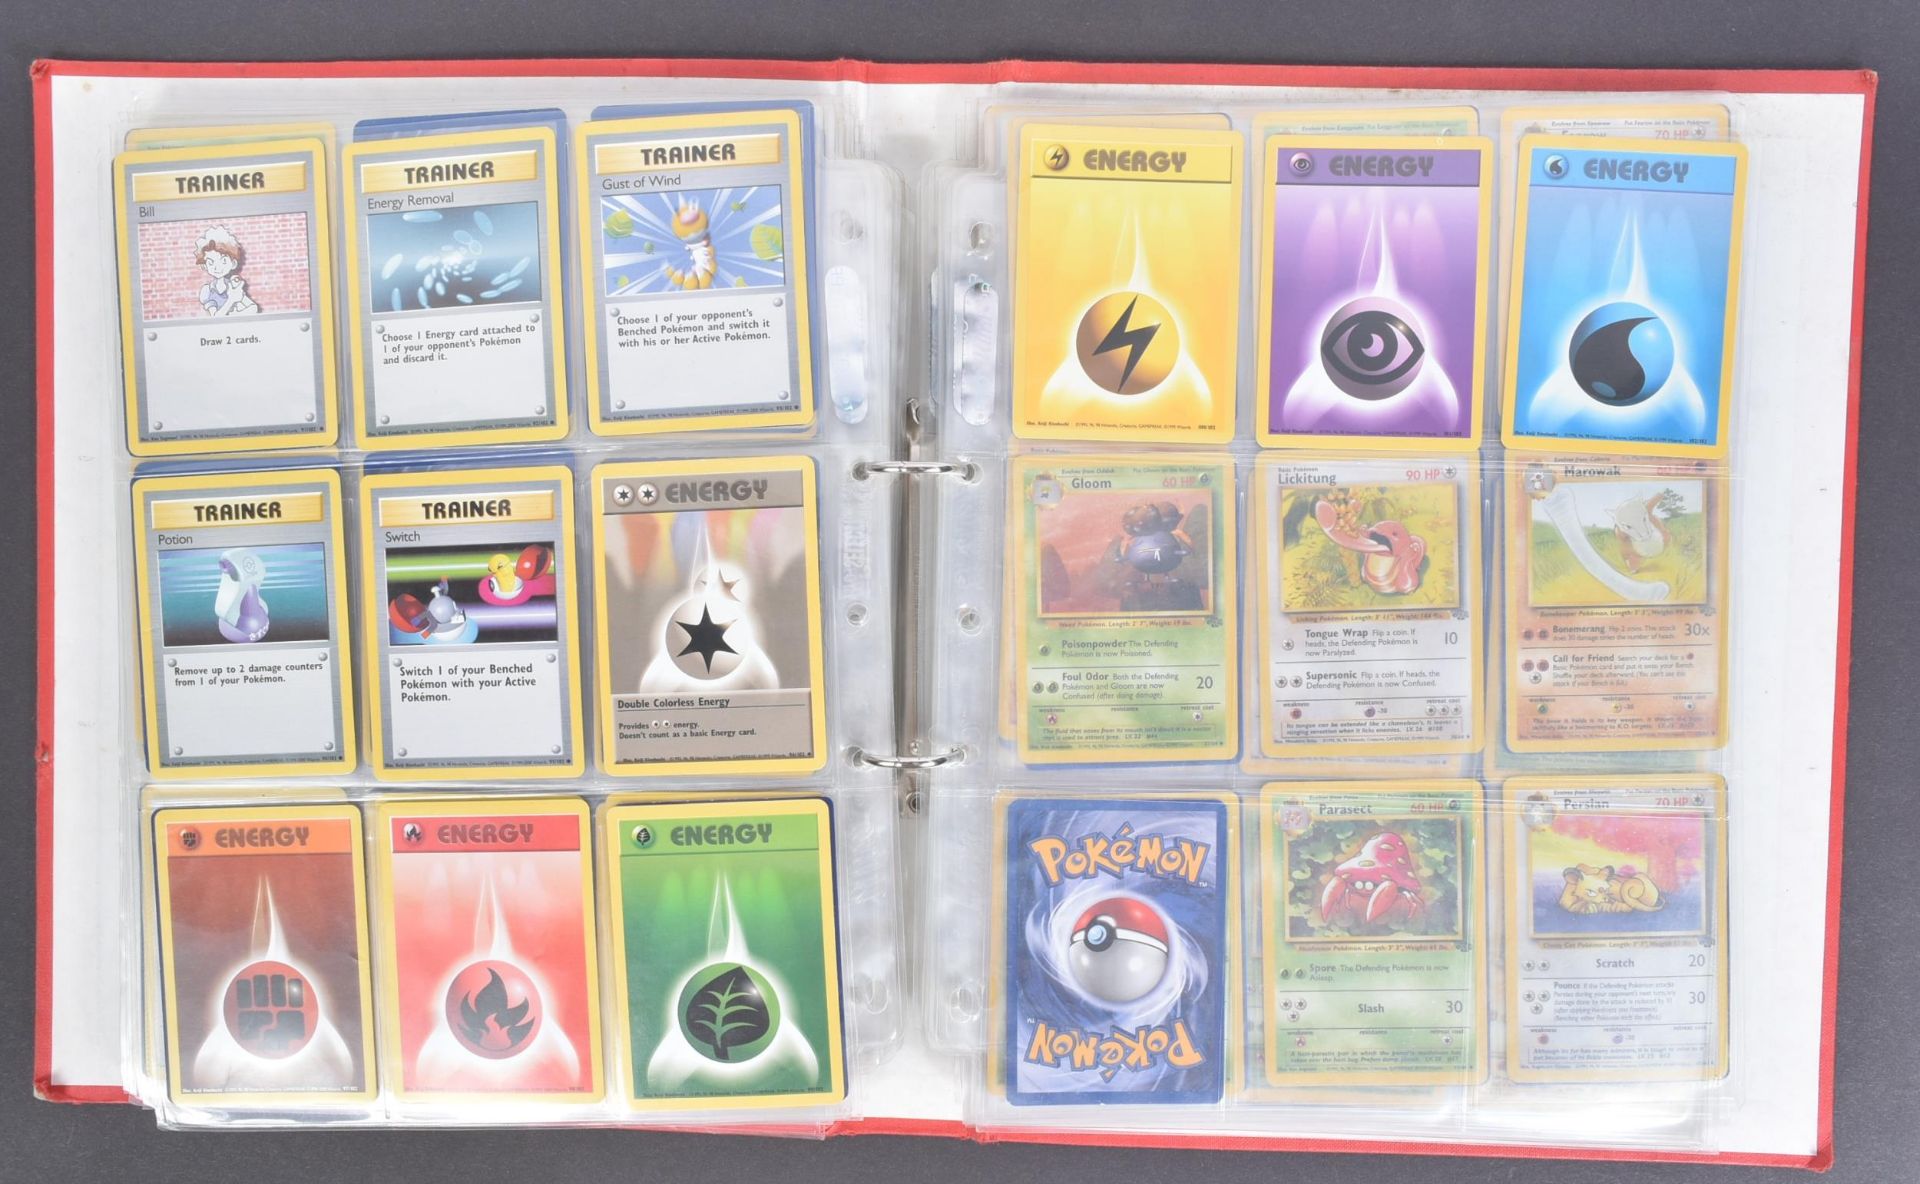 POKEMON TRADING CARD GAME - COLLECTION OF POKEMON WIZARDS OF THE COAST CARDS - Image 17 of 27